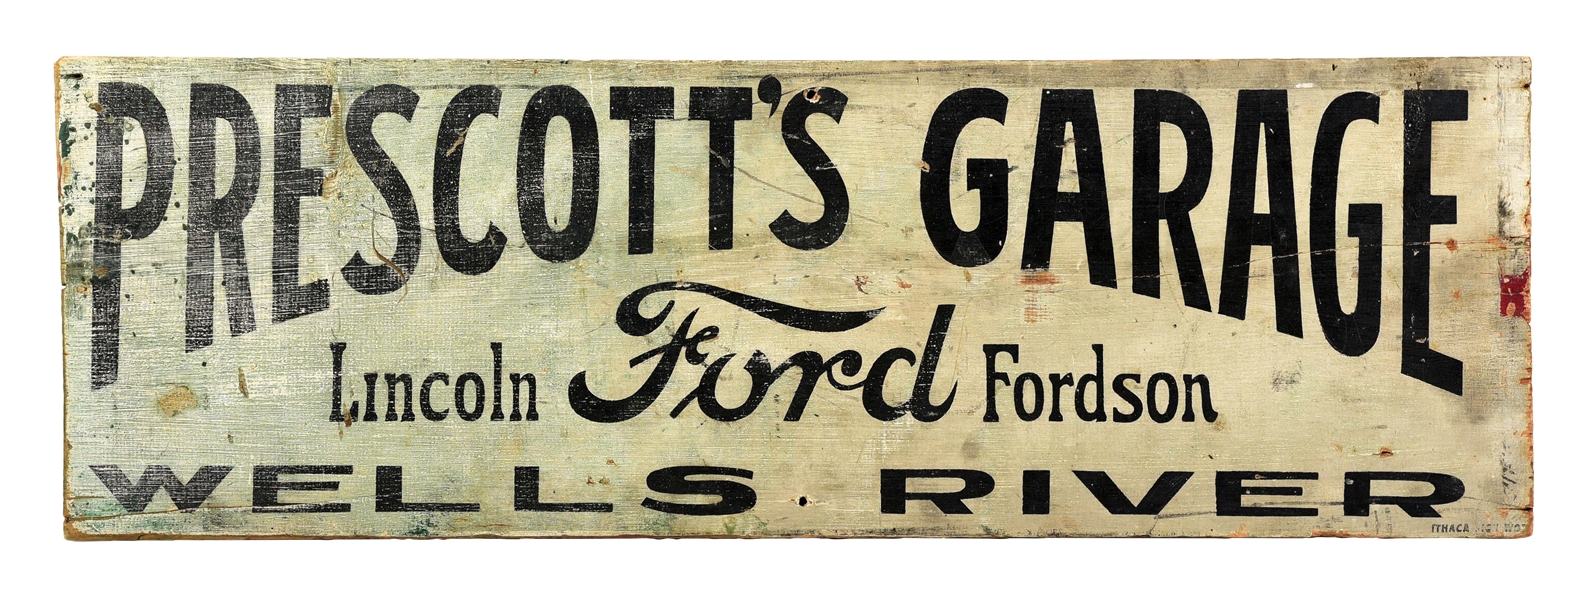 PRESCOTTS GARAGE LINCOLN FORD & FORDSON WOODEN ITHACA SIGN. 